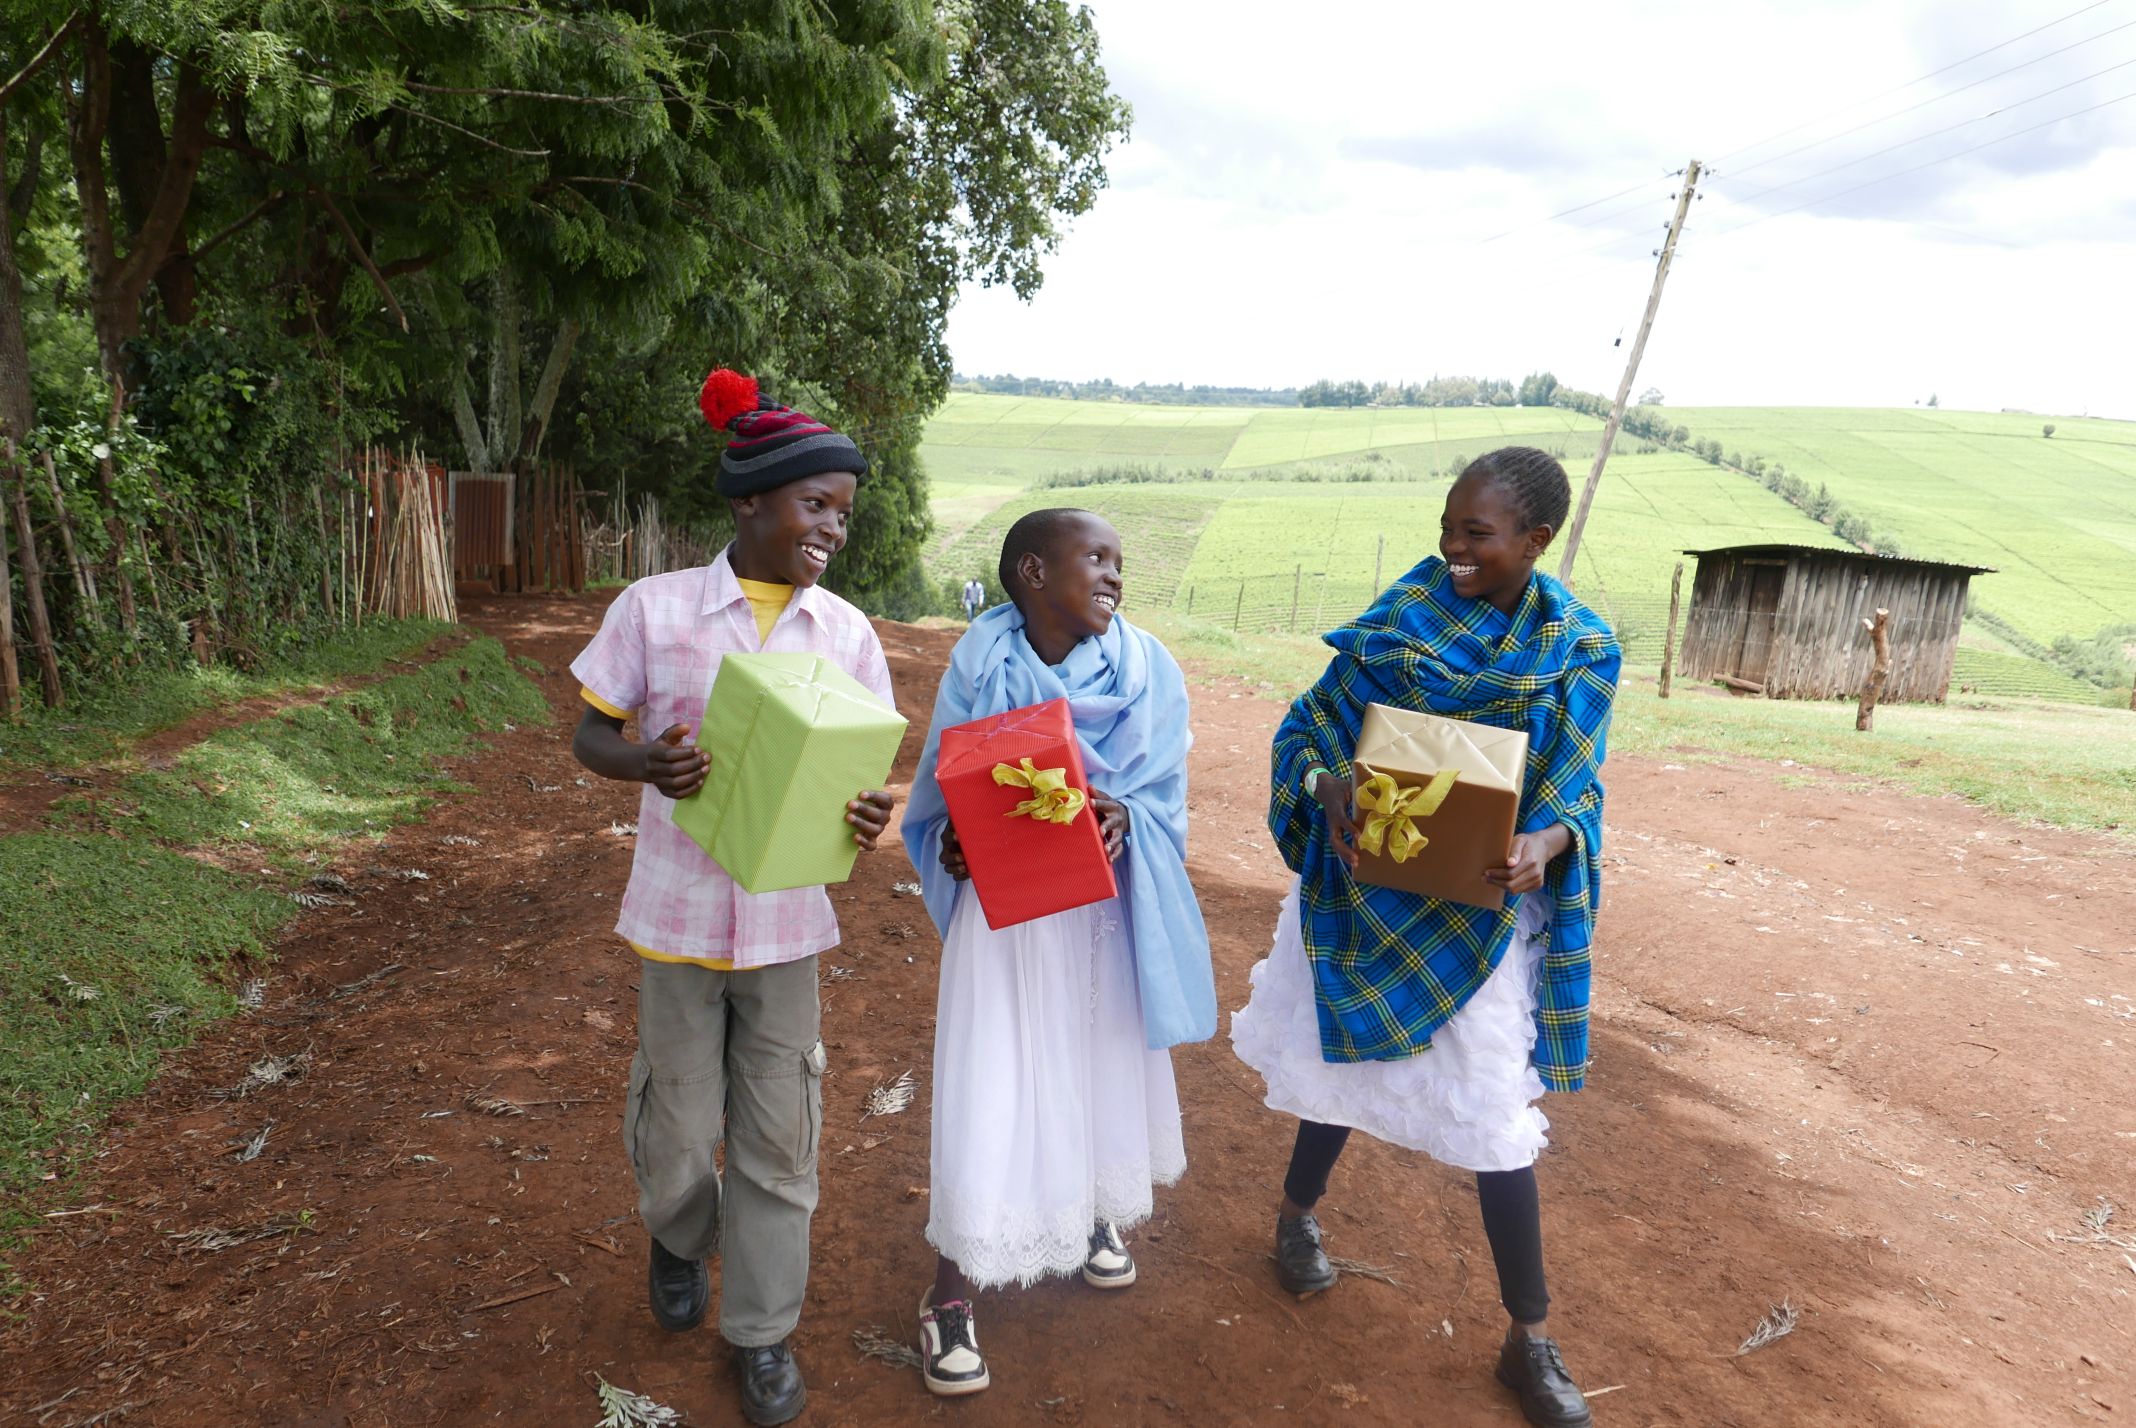 kids in africa walking with gifts